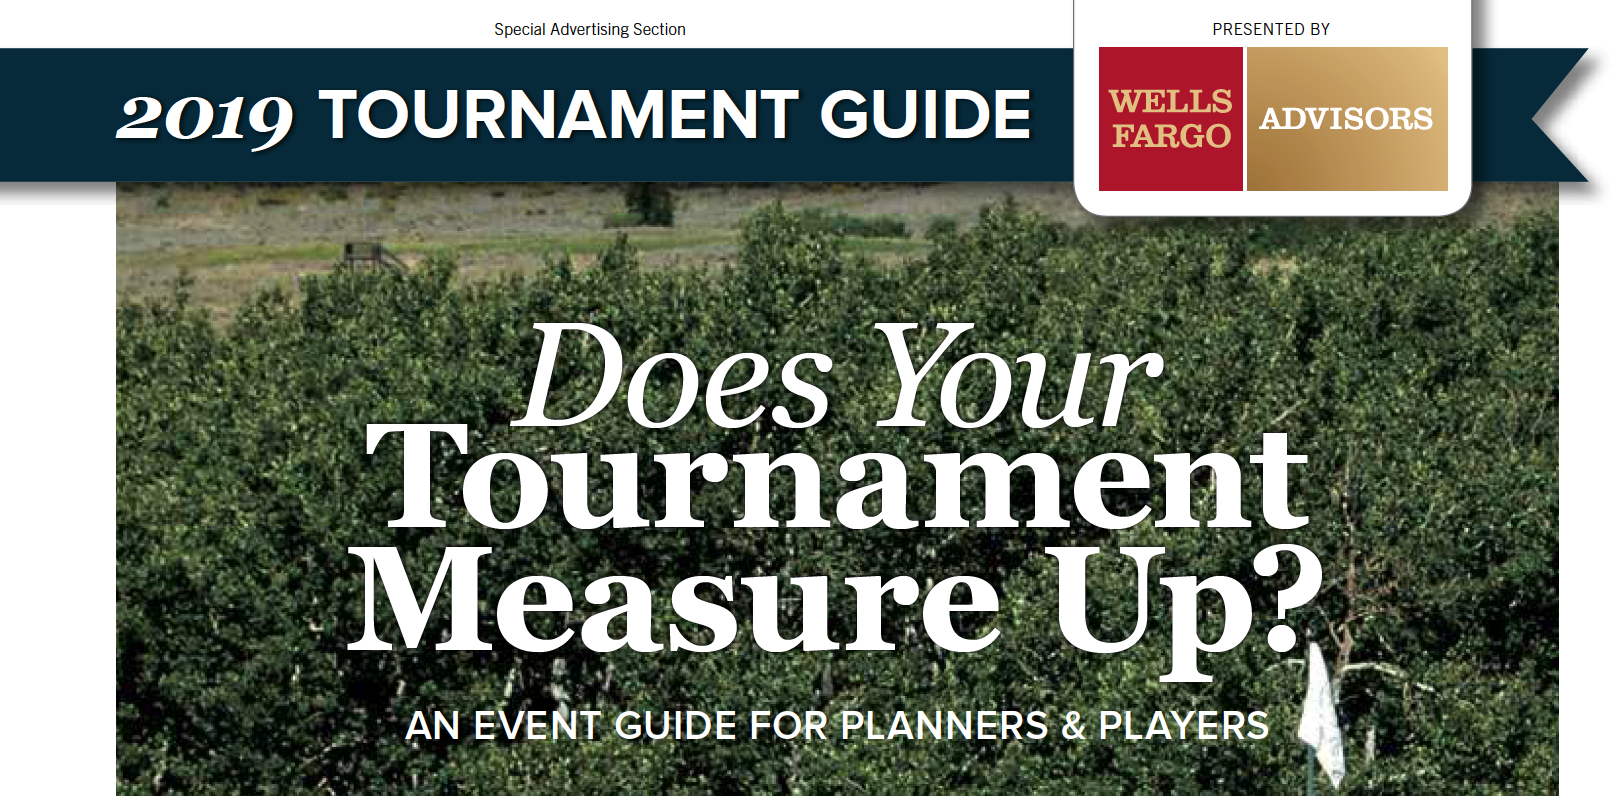 2019 Tournament Guide. Presented by Wells Fargo Advisors